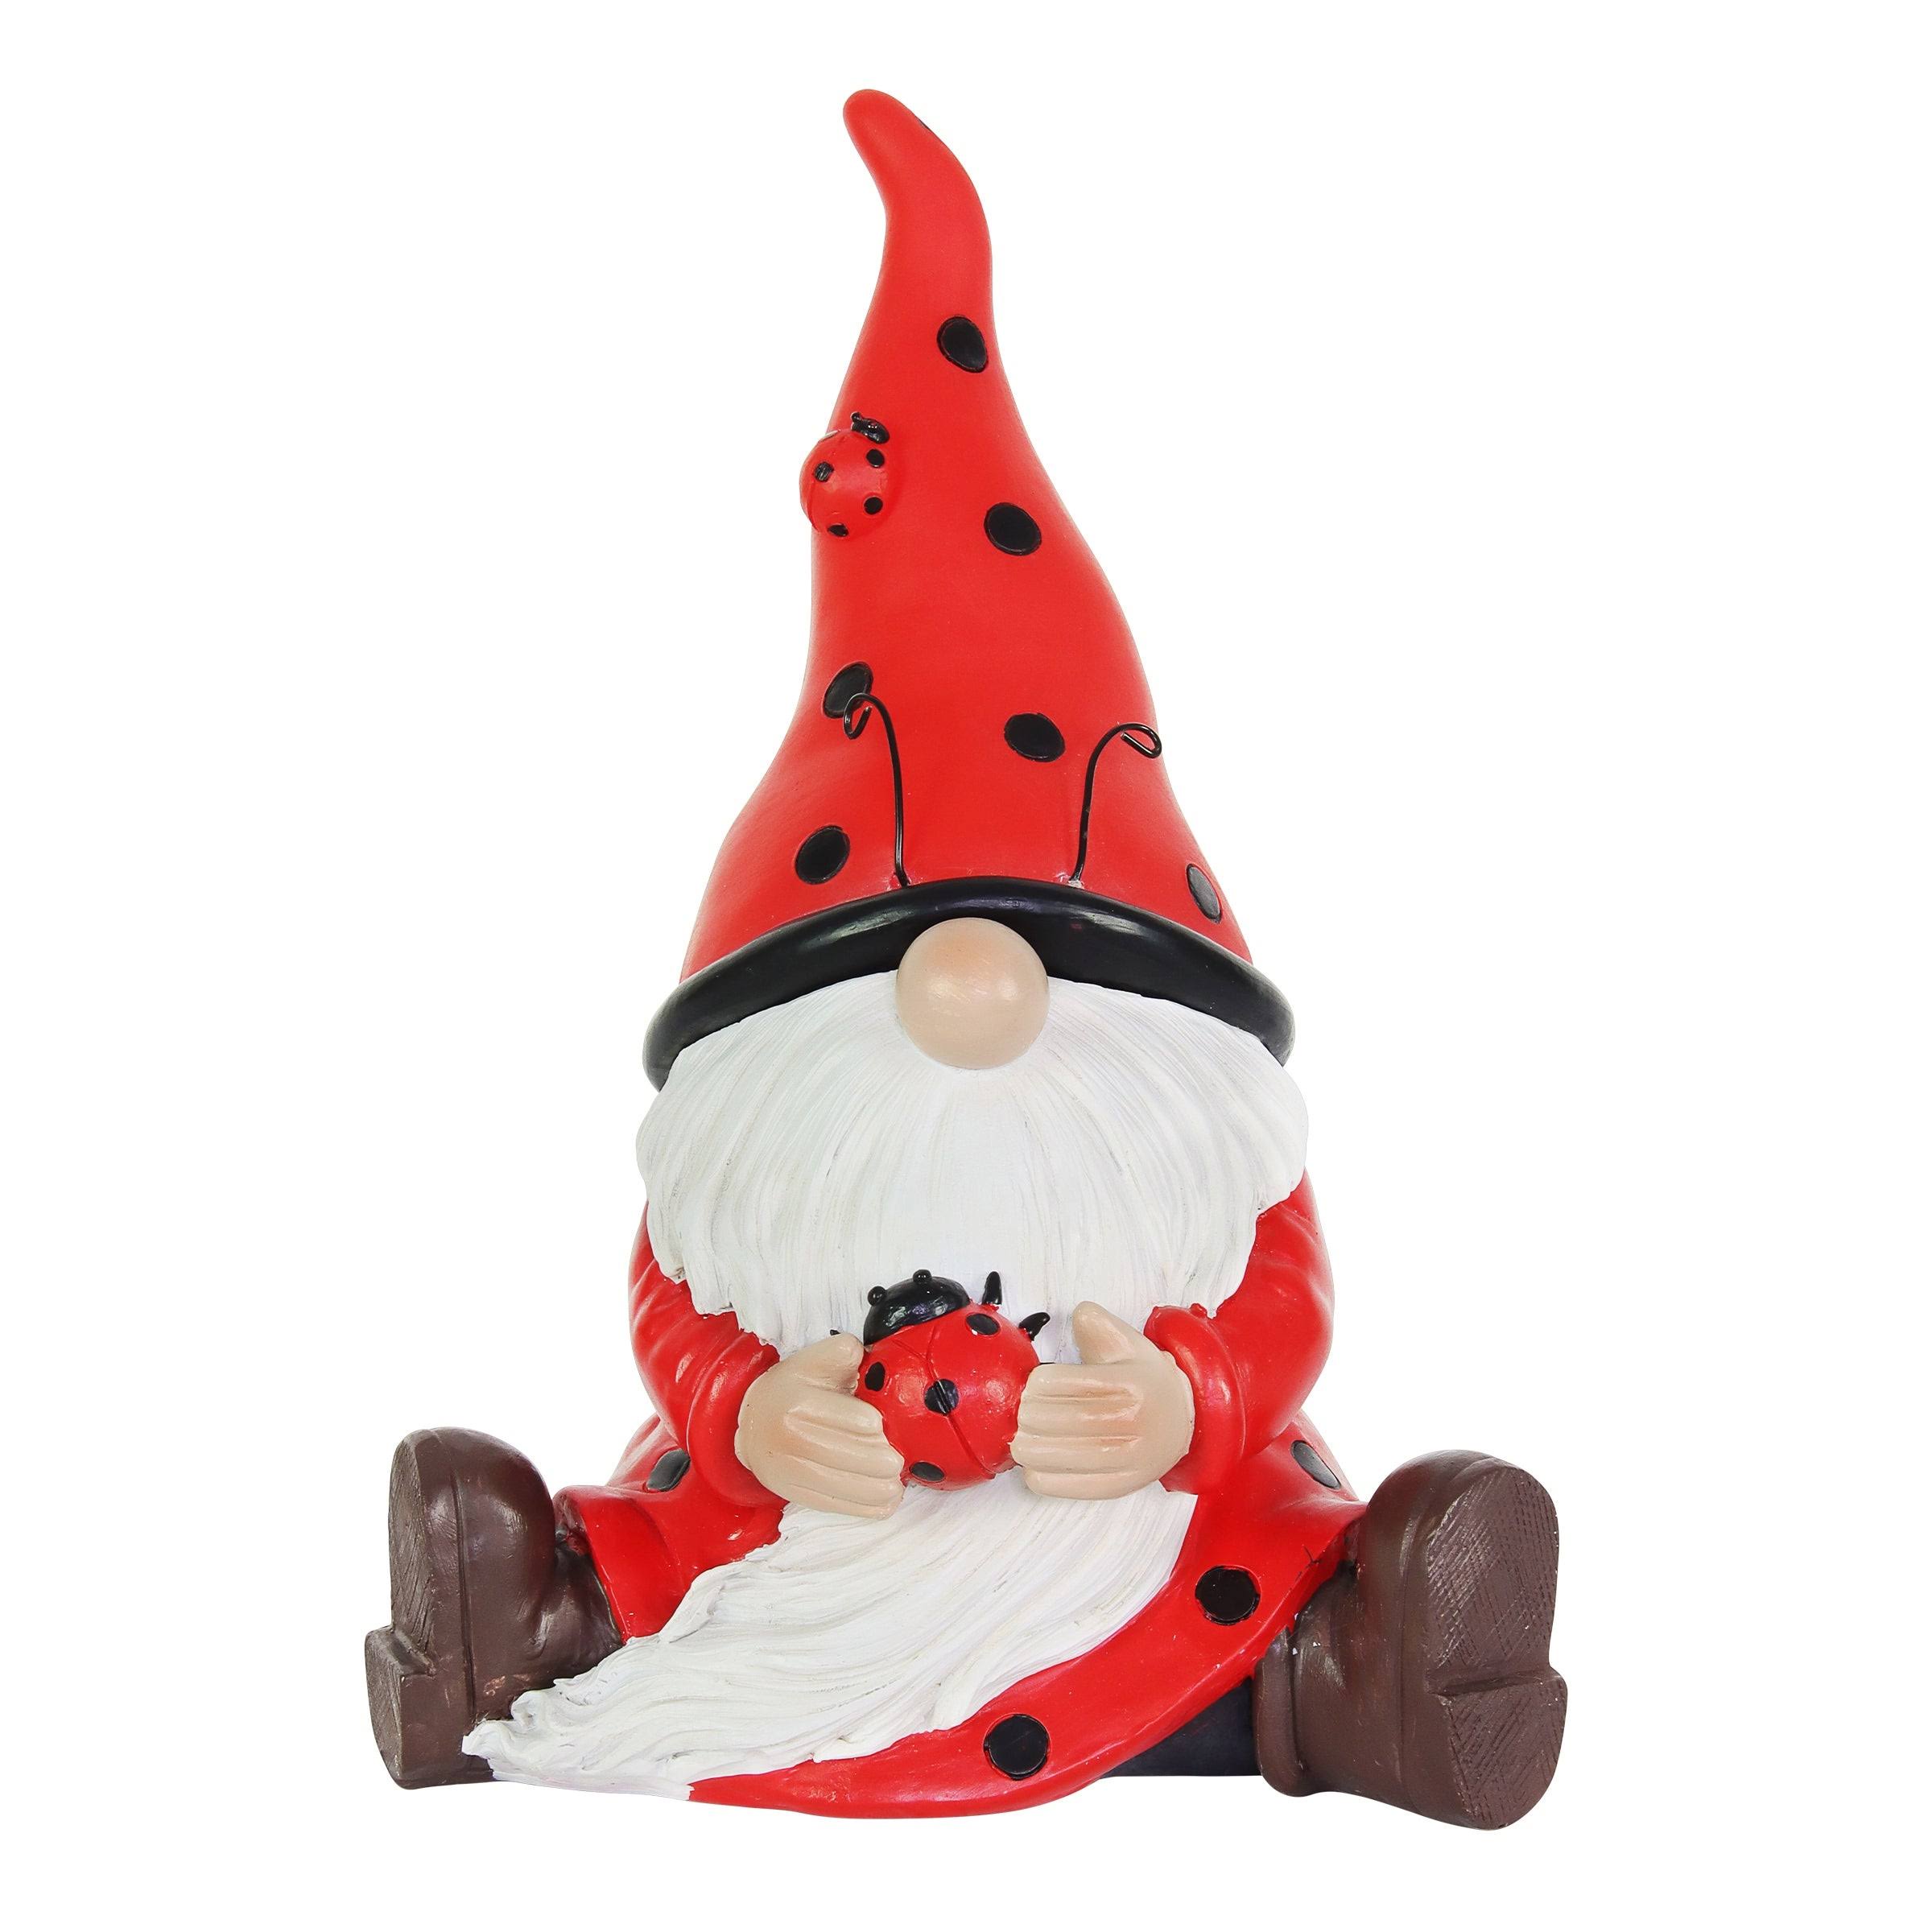 Exhart Solar Ladybug Hat Gnome Statue with Ladybug, 5.5 by 9.5 Inches - Resin - Multi